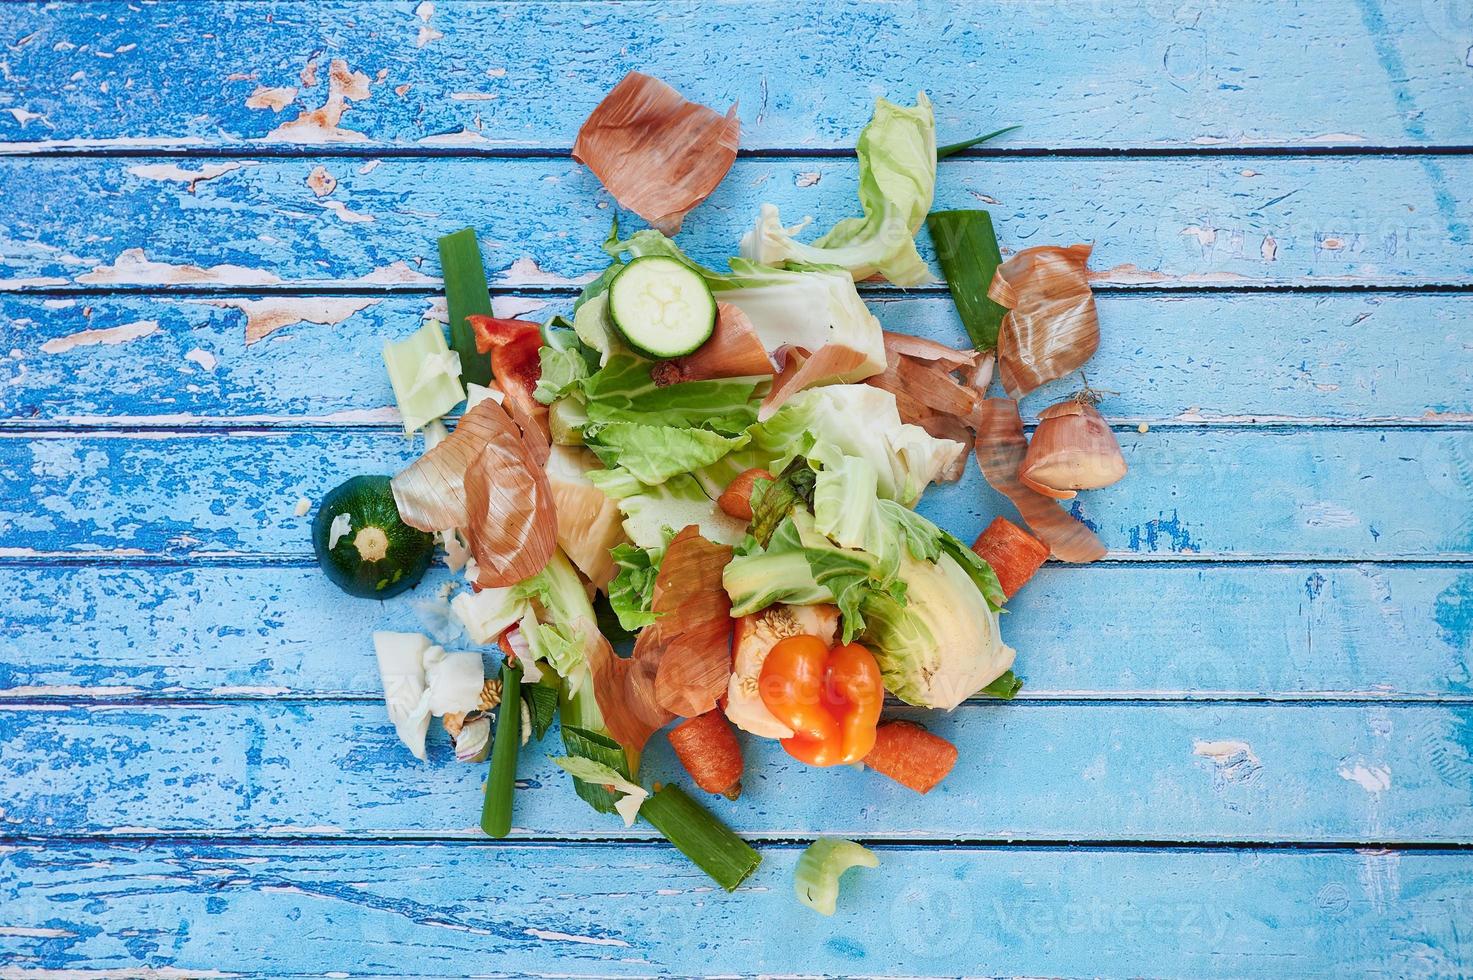 organic vegetables waste against blue wooden surface photo